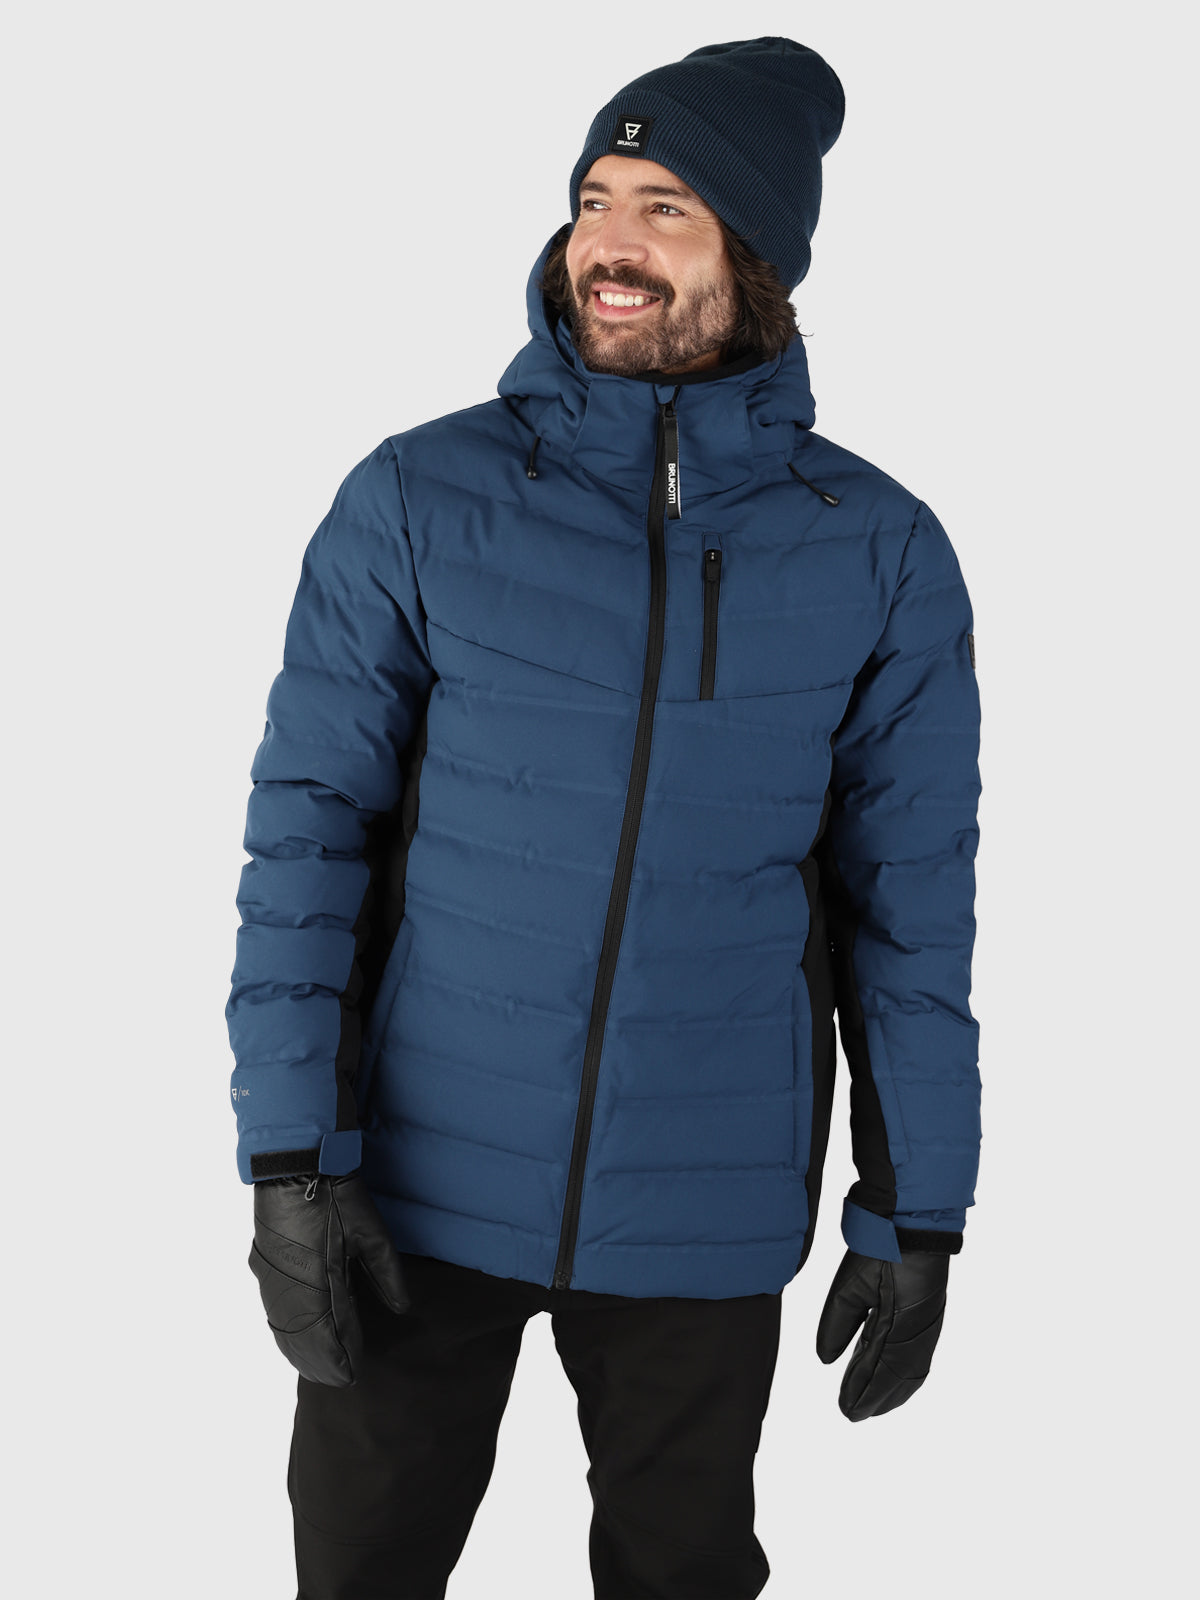 Winter & Sports Accessories Clothing